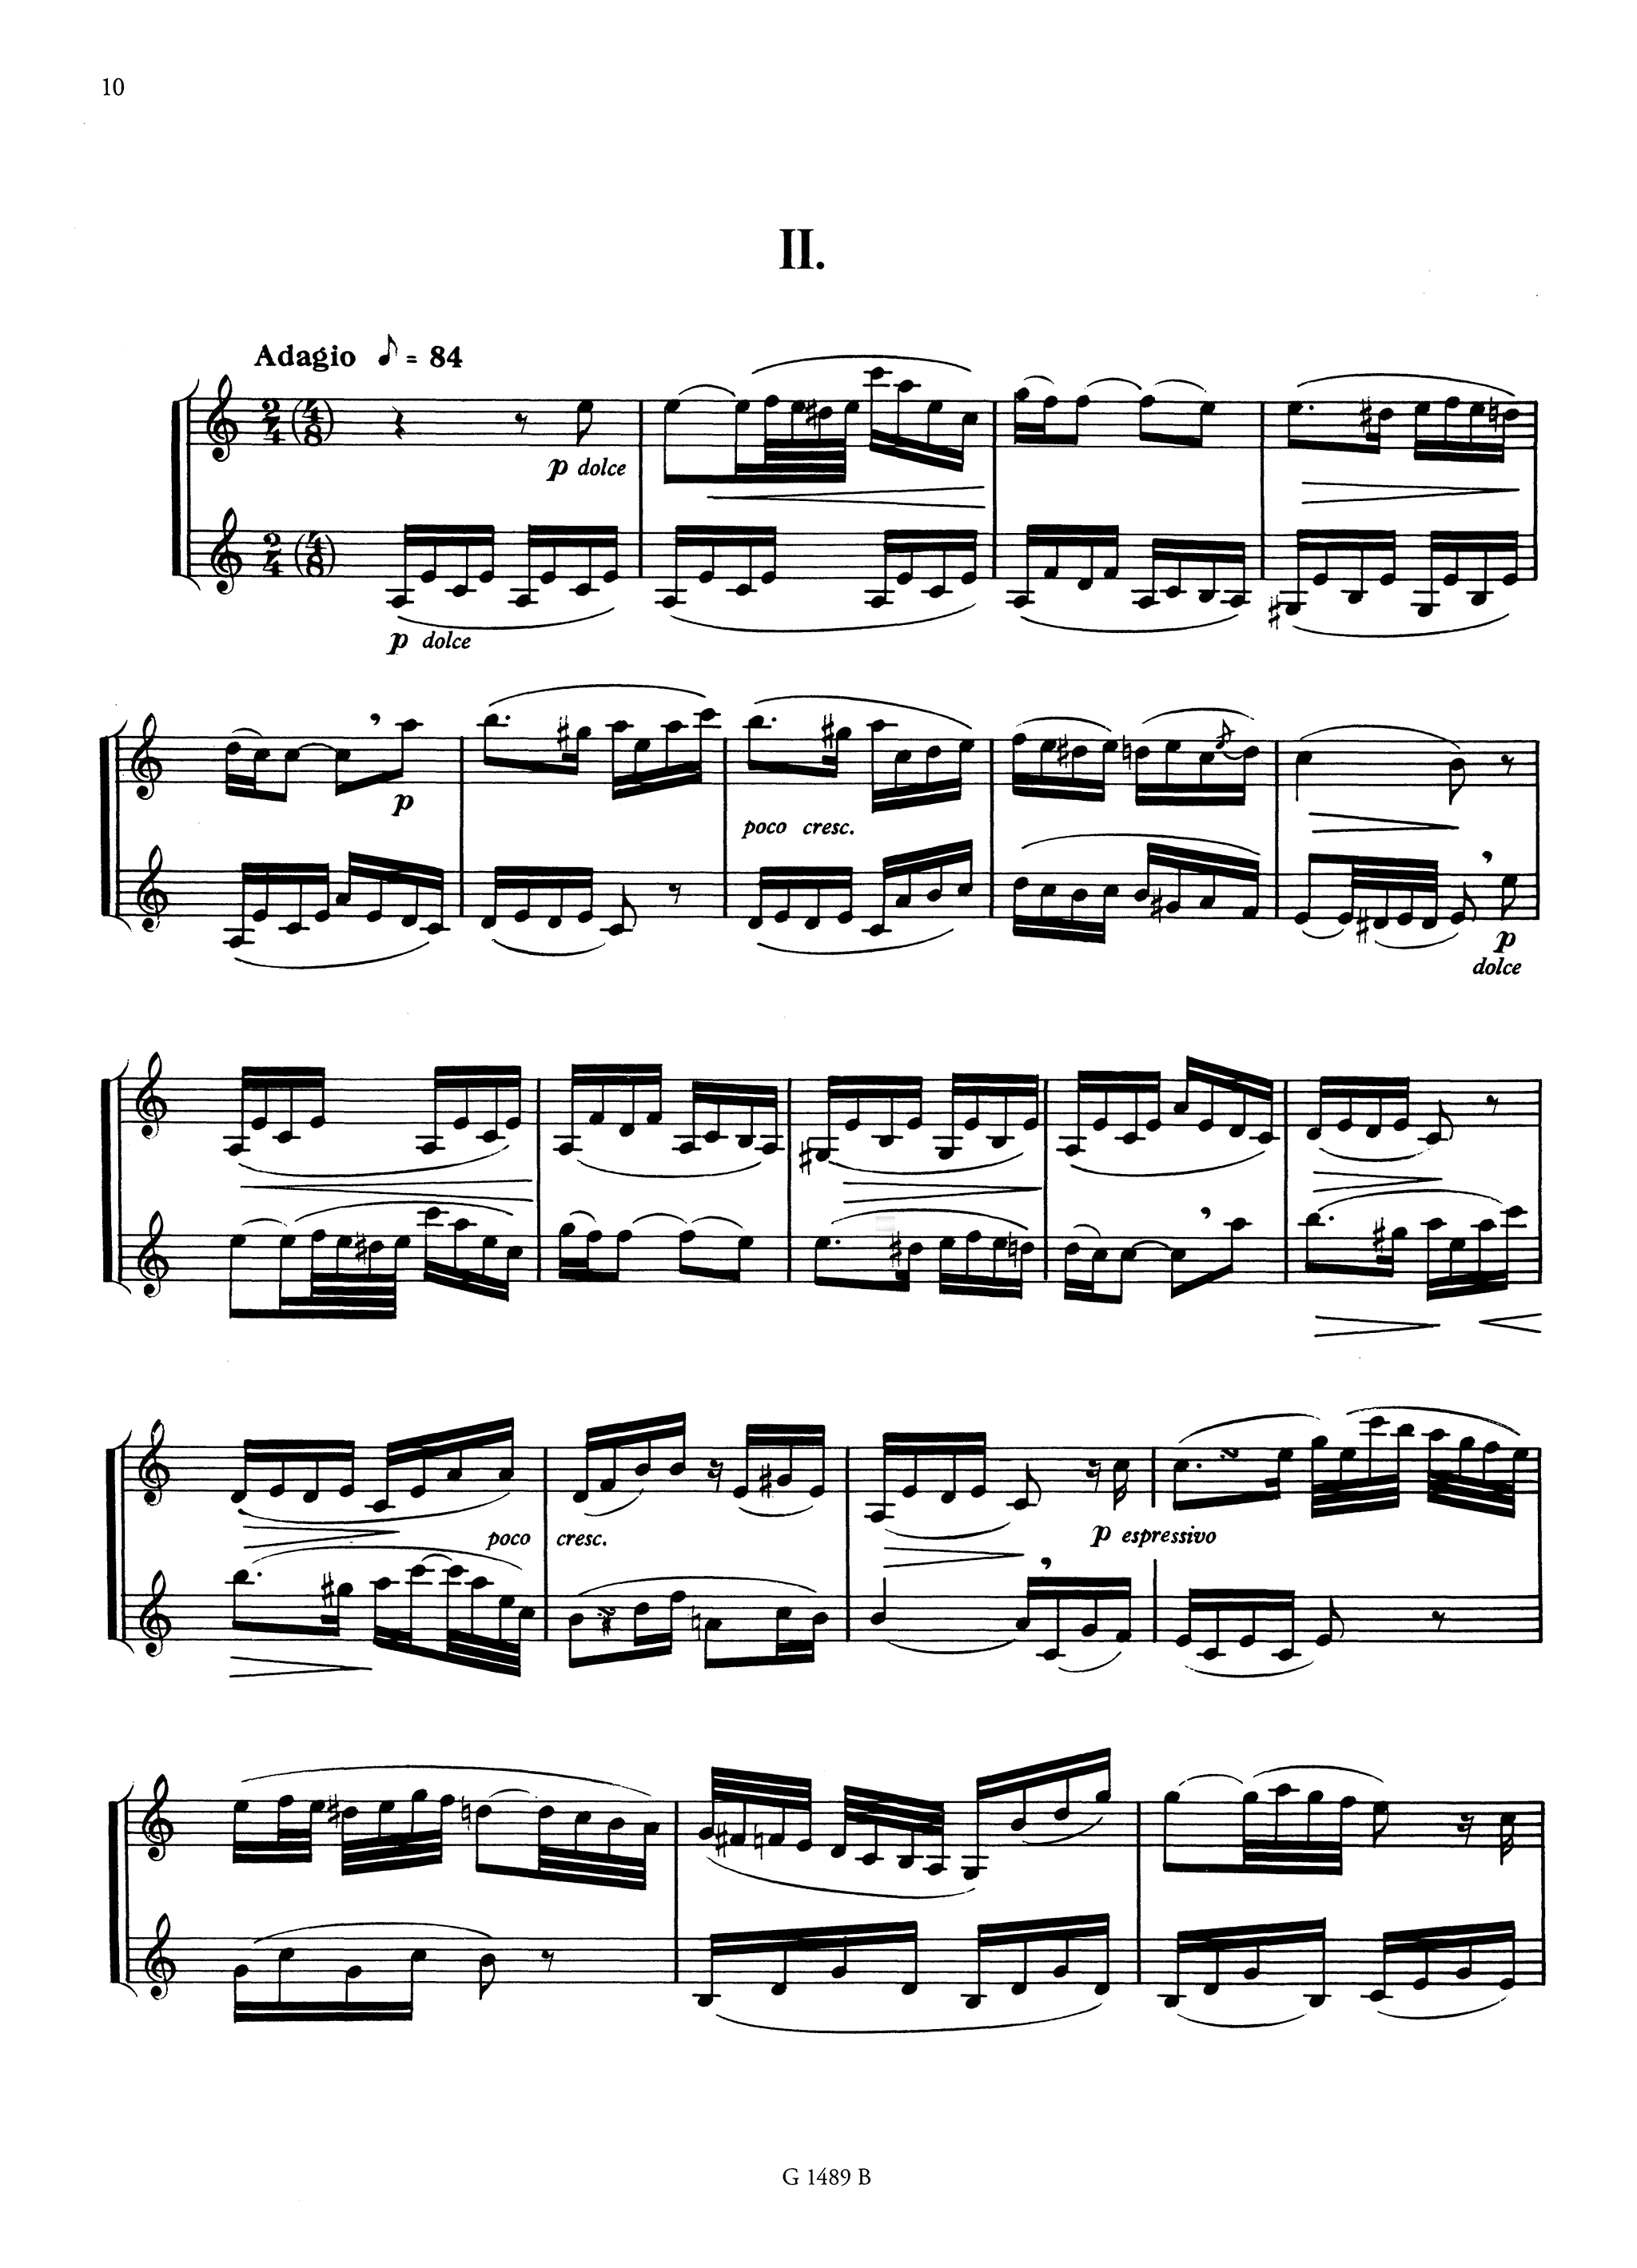 Gebauer Classical Sonata No. 1 arranged by Cahuzac for clarinet duet - Movement 2